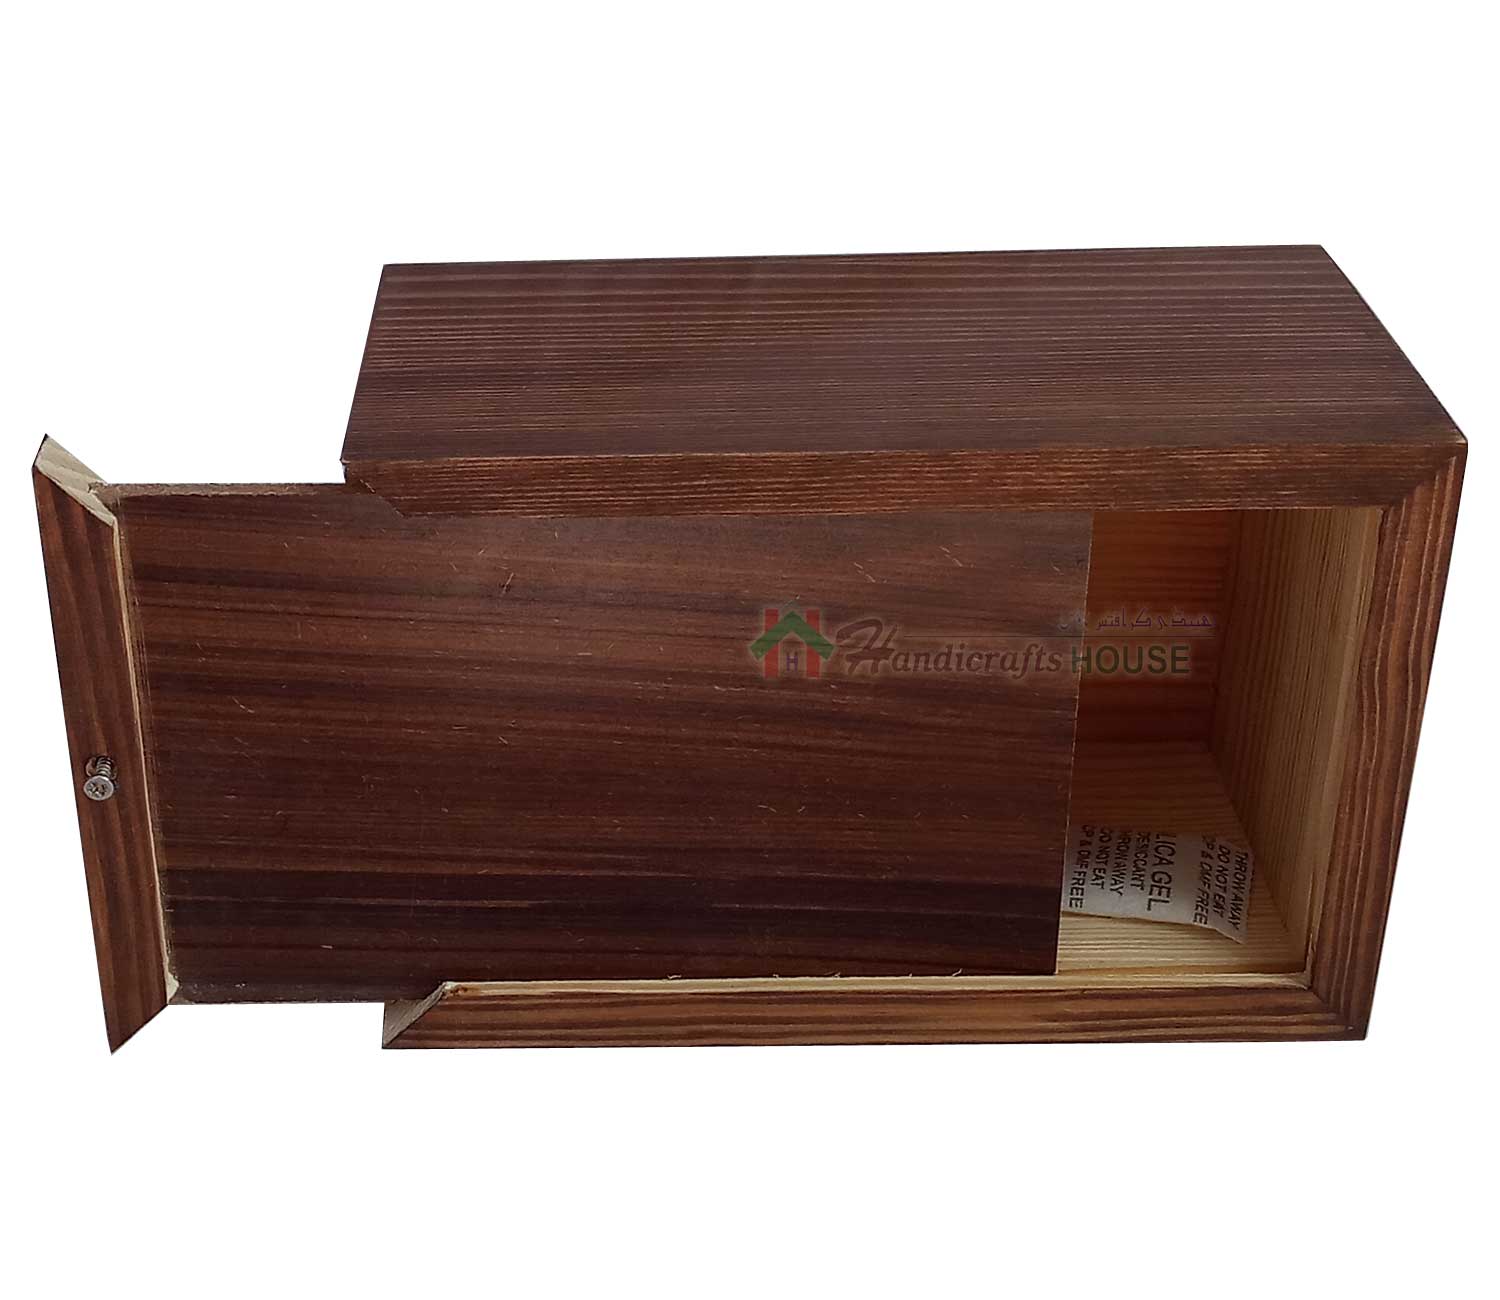 Funeral Ashes Container, Wooden burial Urns For Human, Wood Boxes, Home Decor Urn, Timber Box